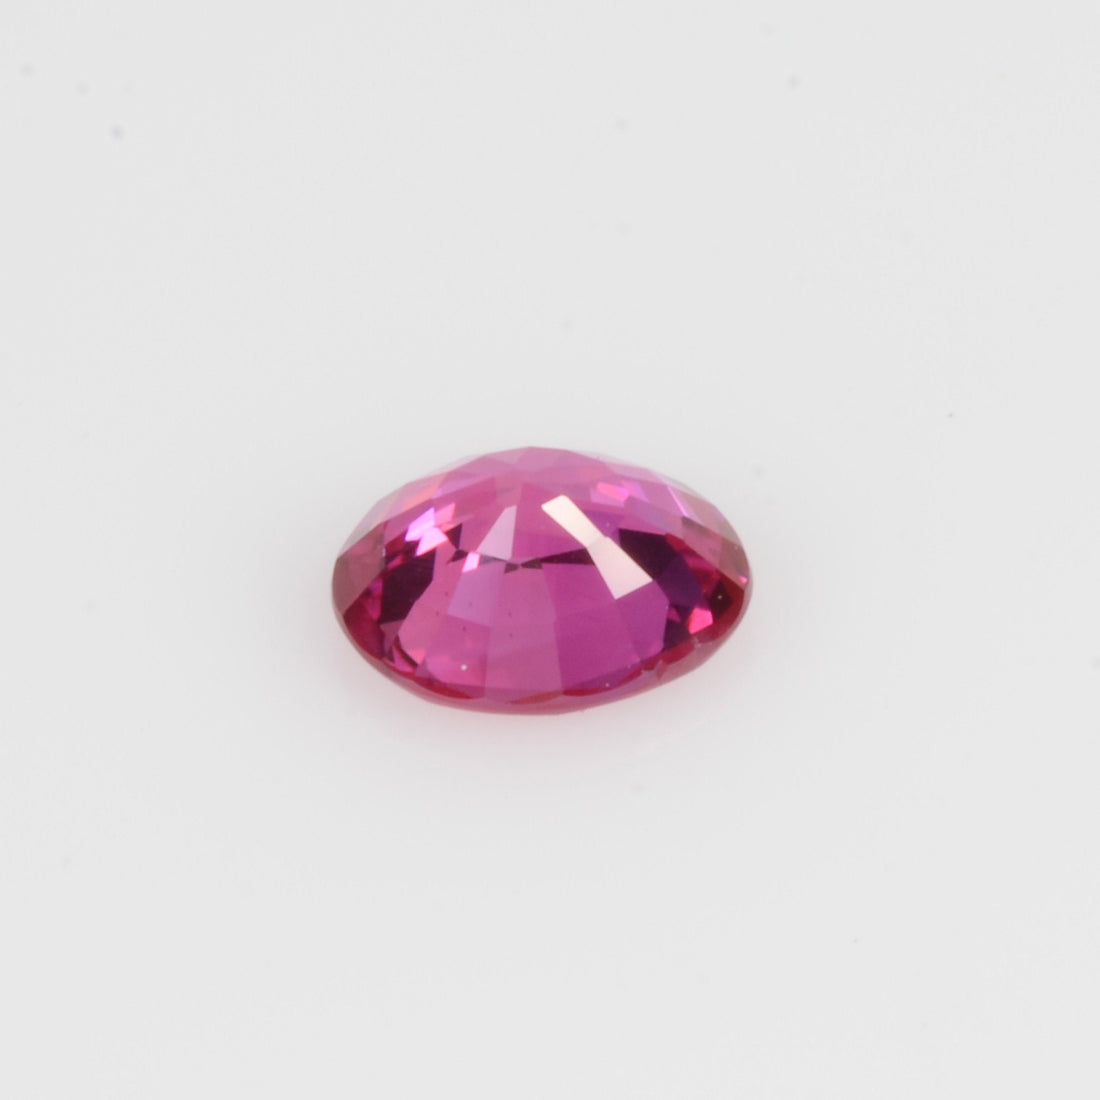 0.36 Cts Natural Ruby Loose Gemstone Oval Cut